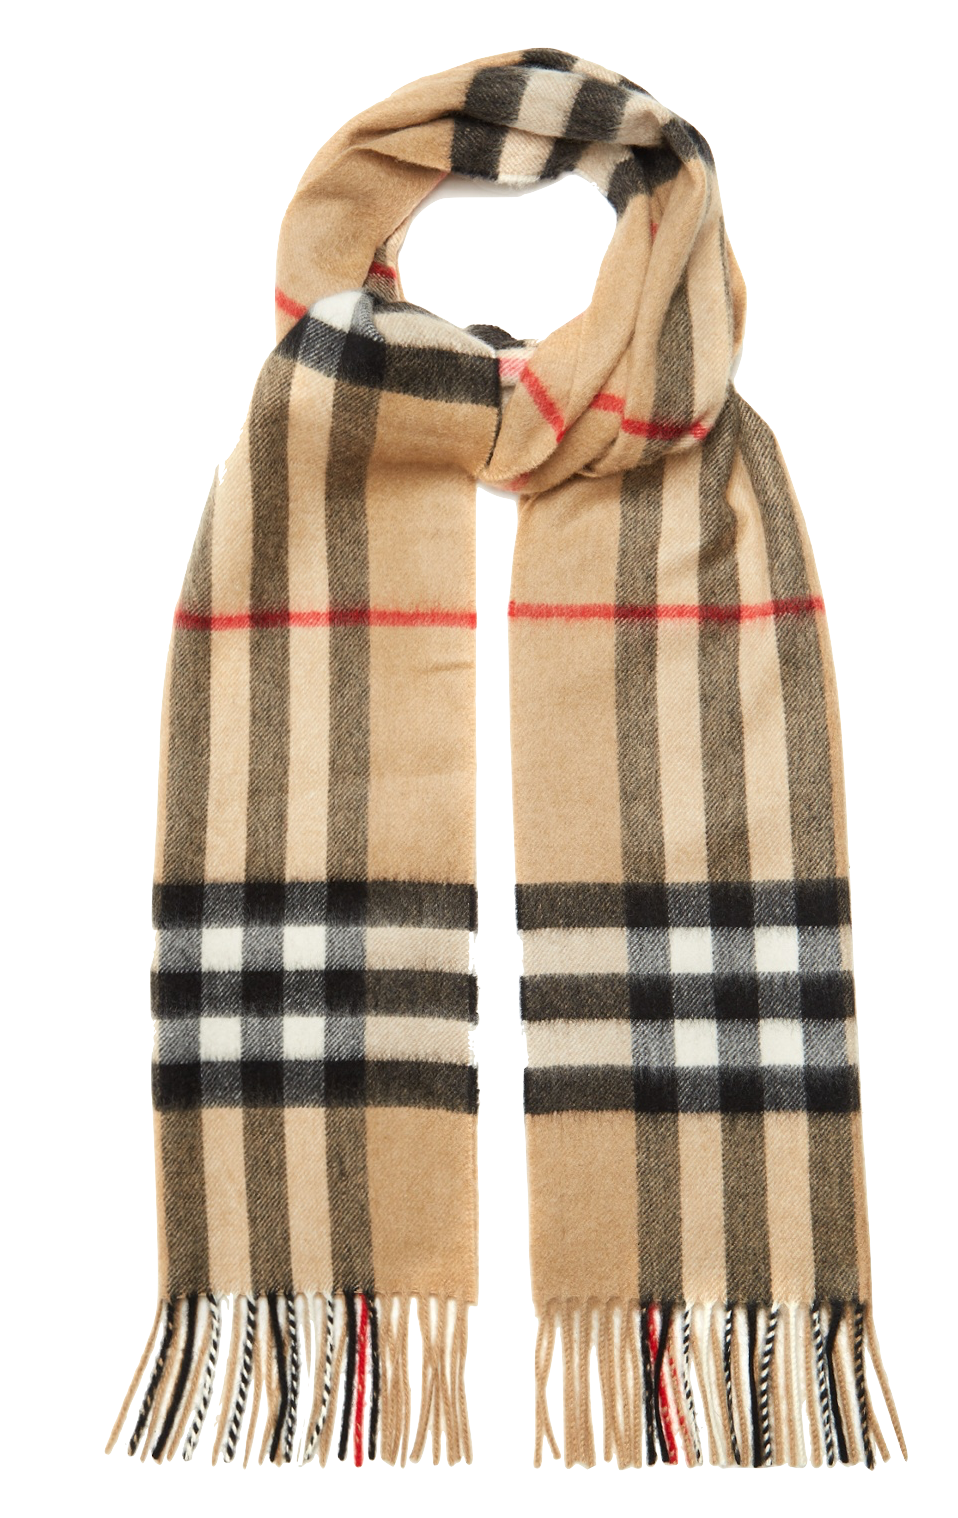 Burberry Pattern PNG High-Quality Image